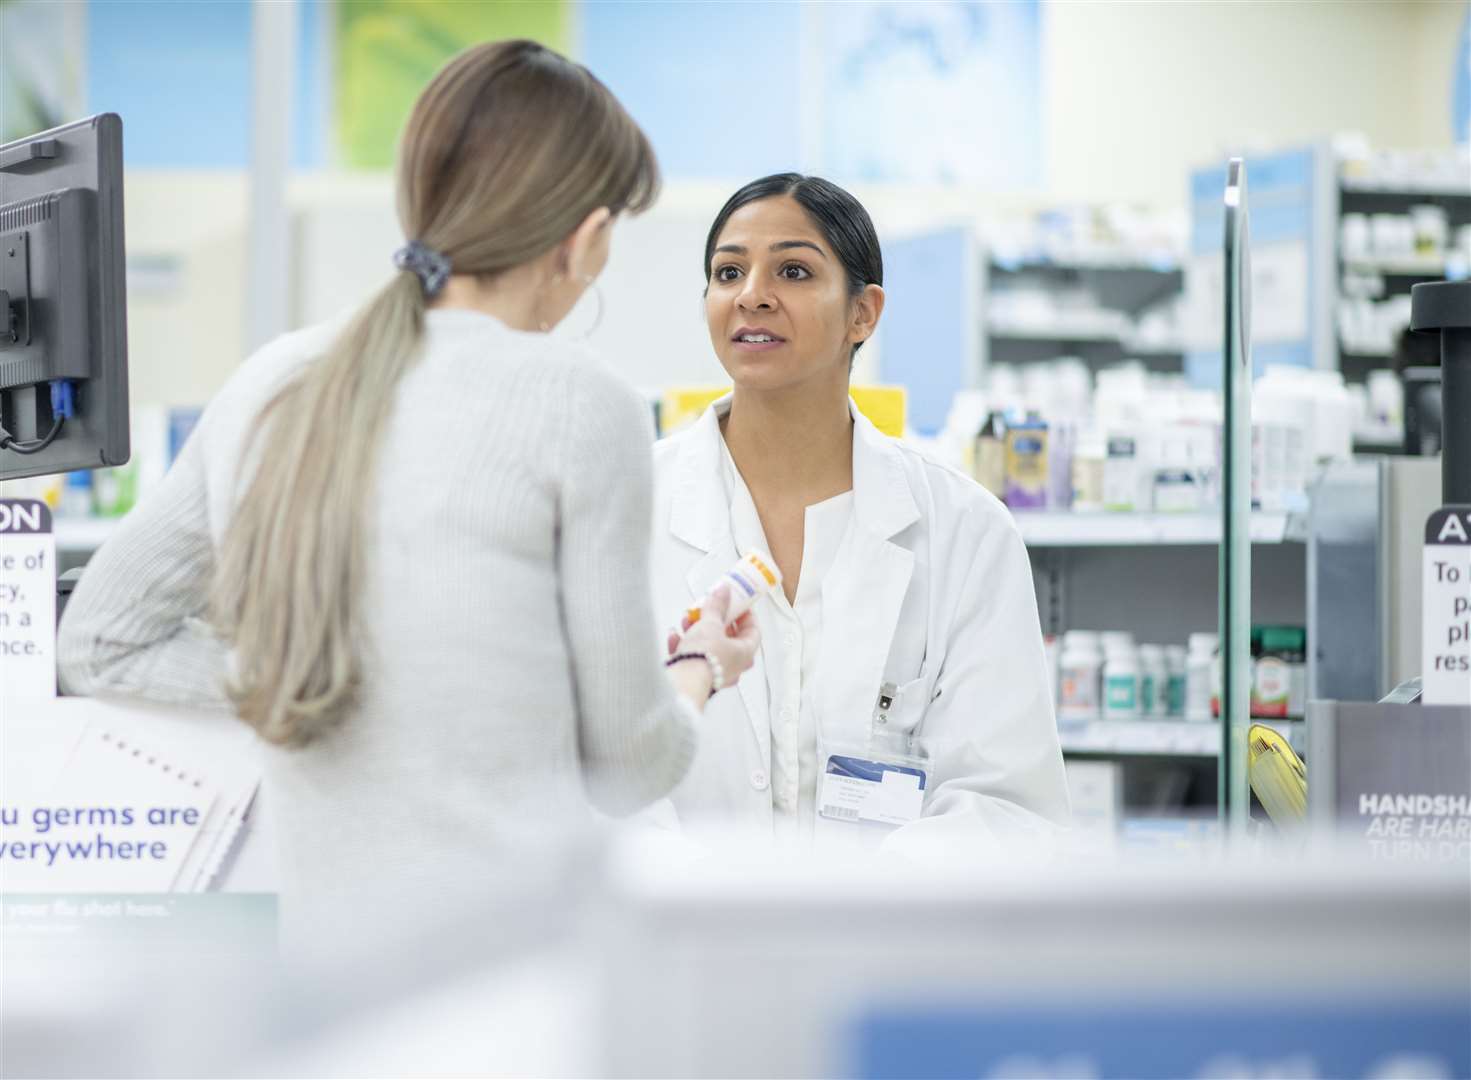 The government is overhauling HRT prescription charges for women. Image: iStock.